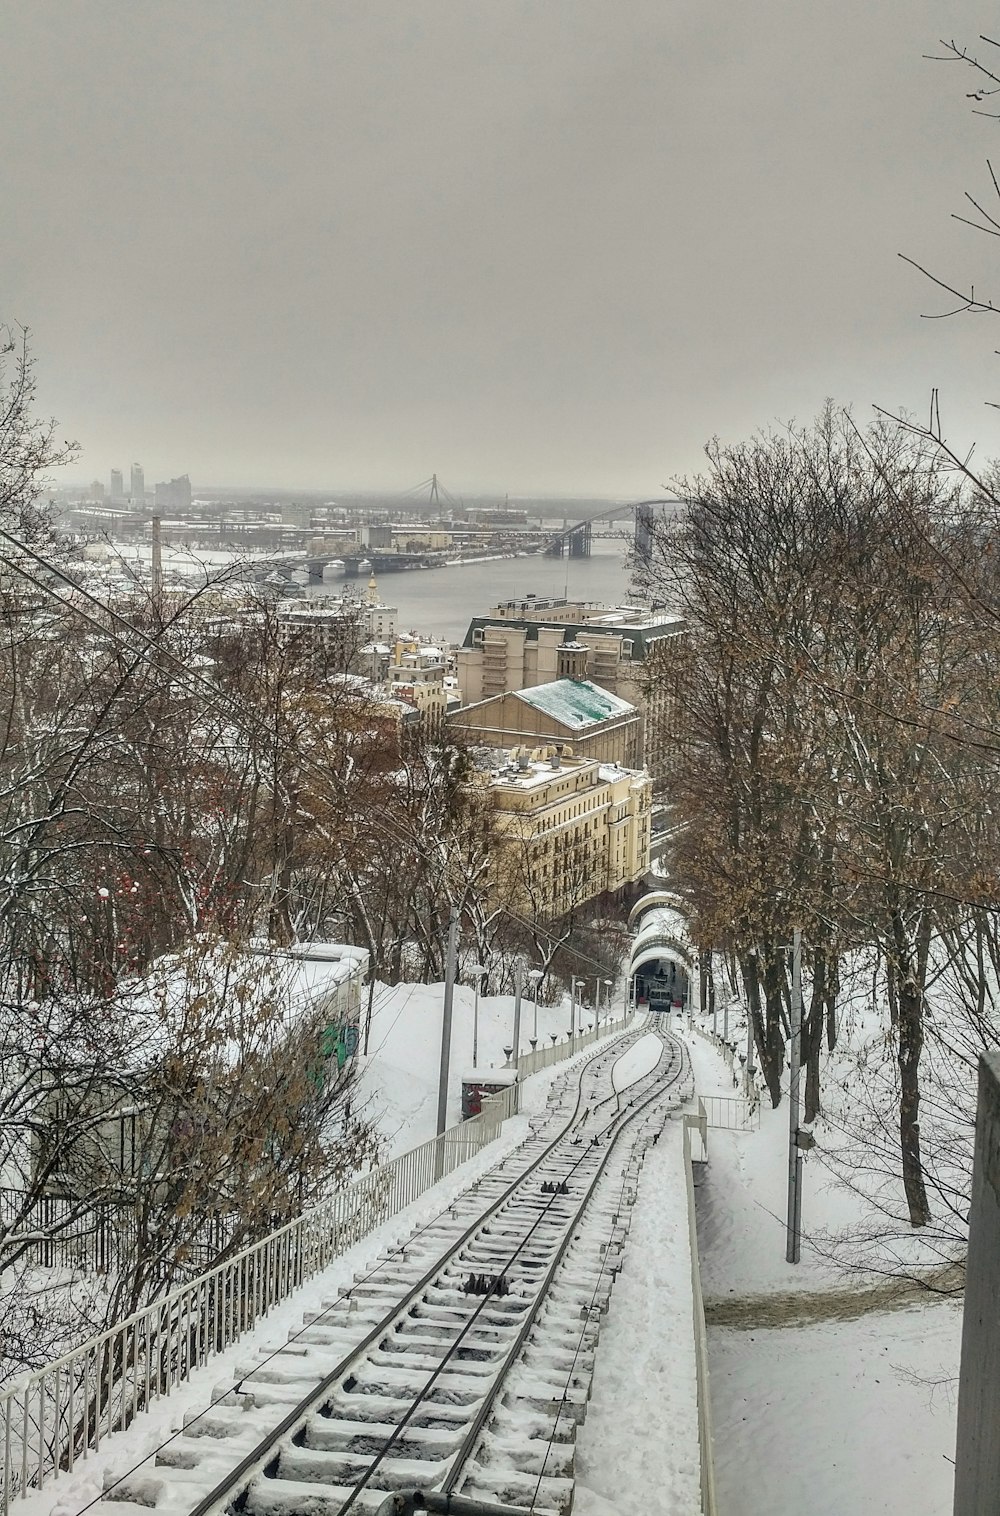 a view of a train track in the snow